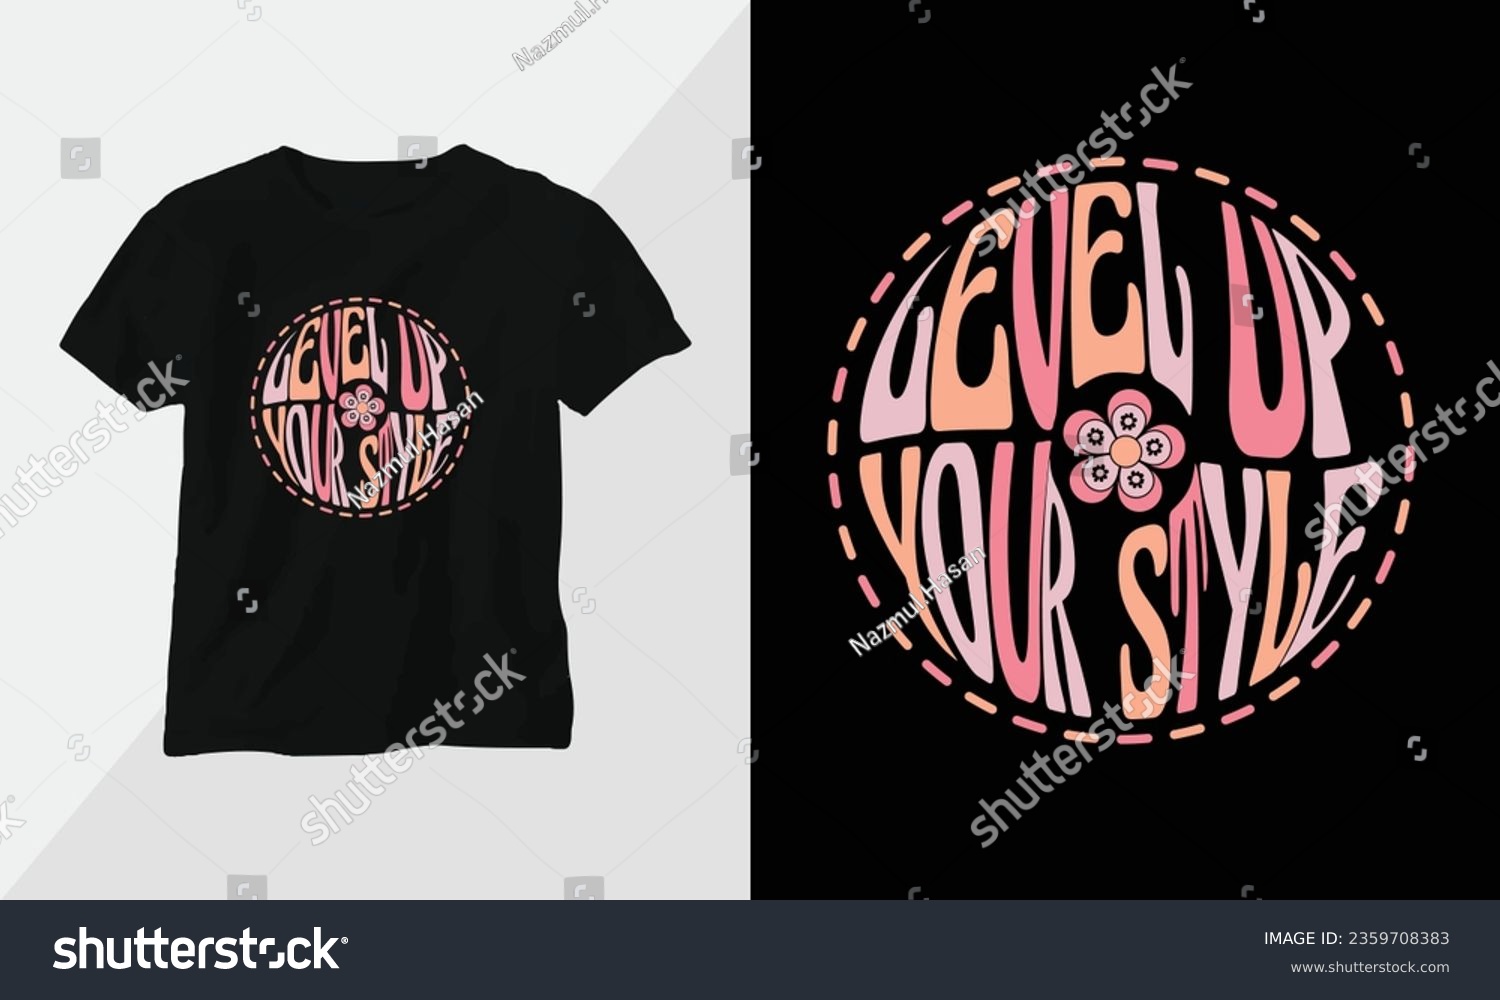 SVG of Level up your style - Retro Groovy Inspirational T-shirt Design with retro style svg